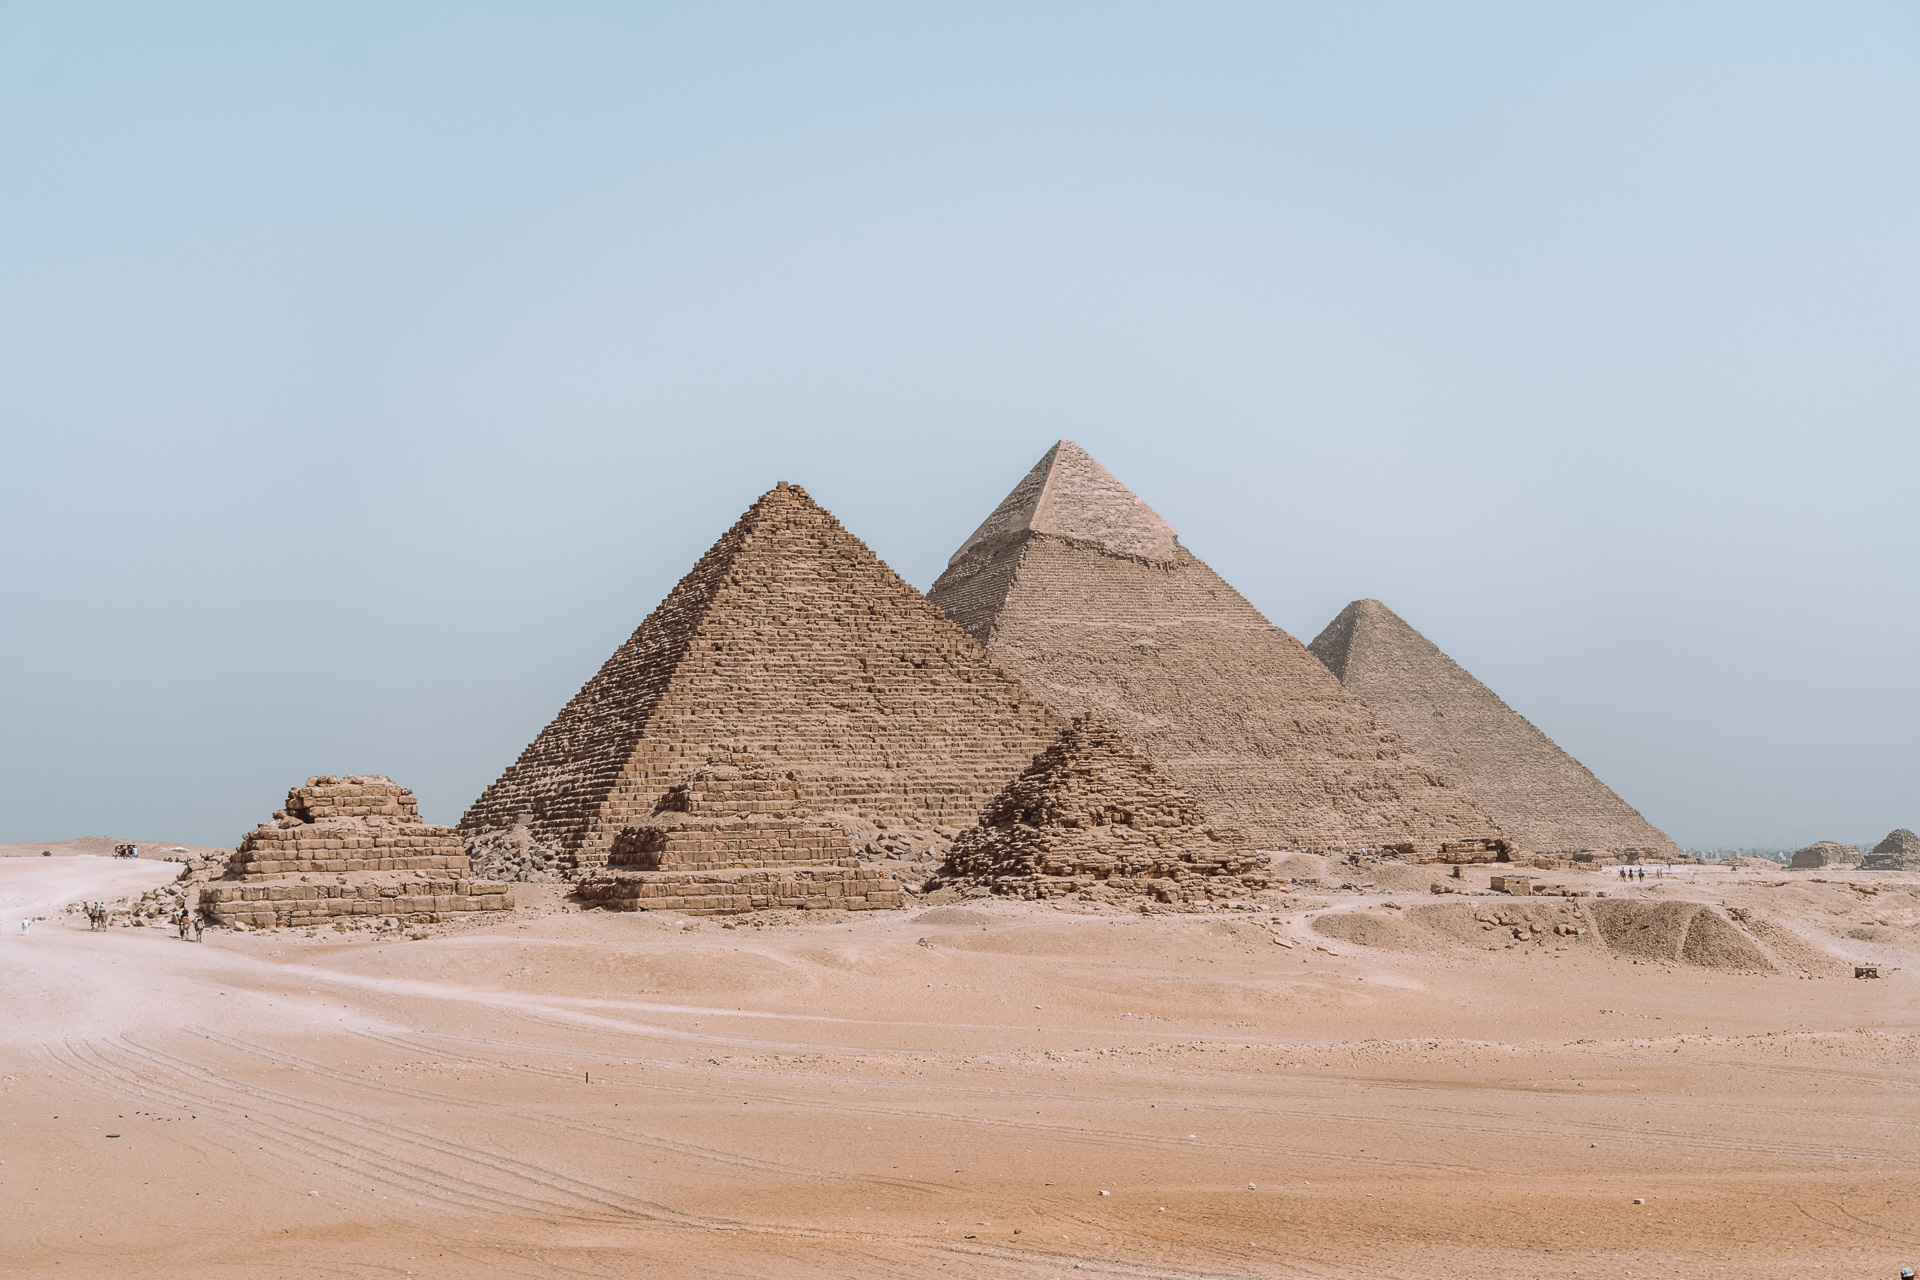 Visit The Pyramids of Giza without a guide + the 5 best viewpoints